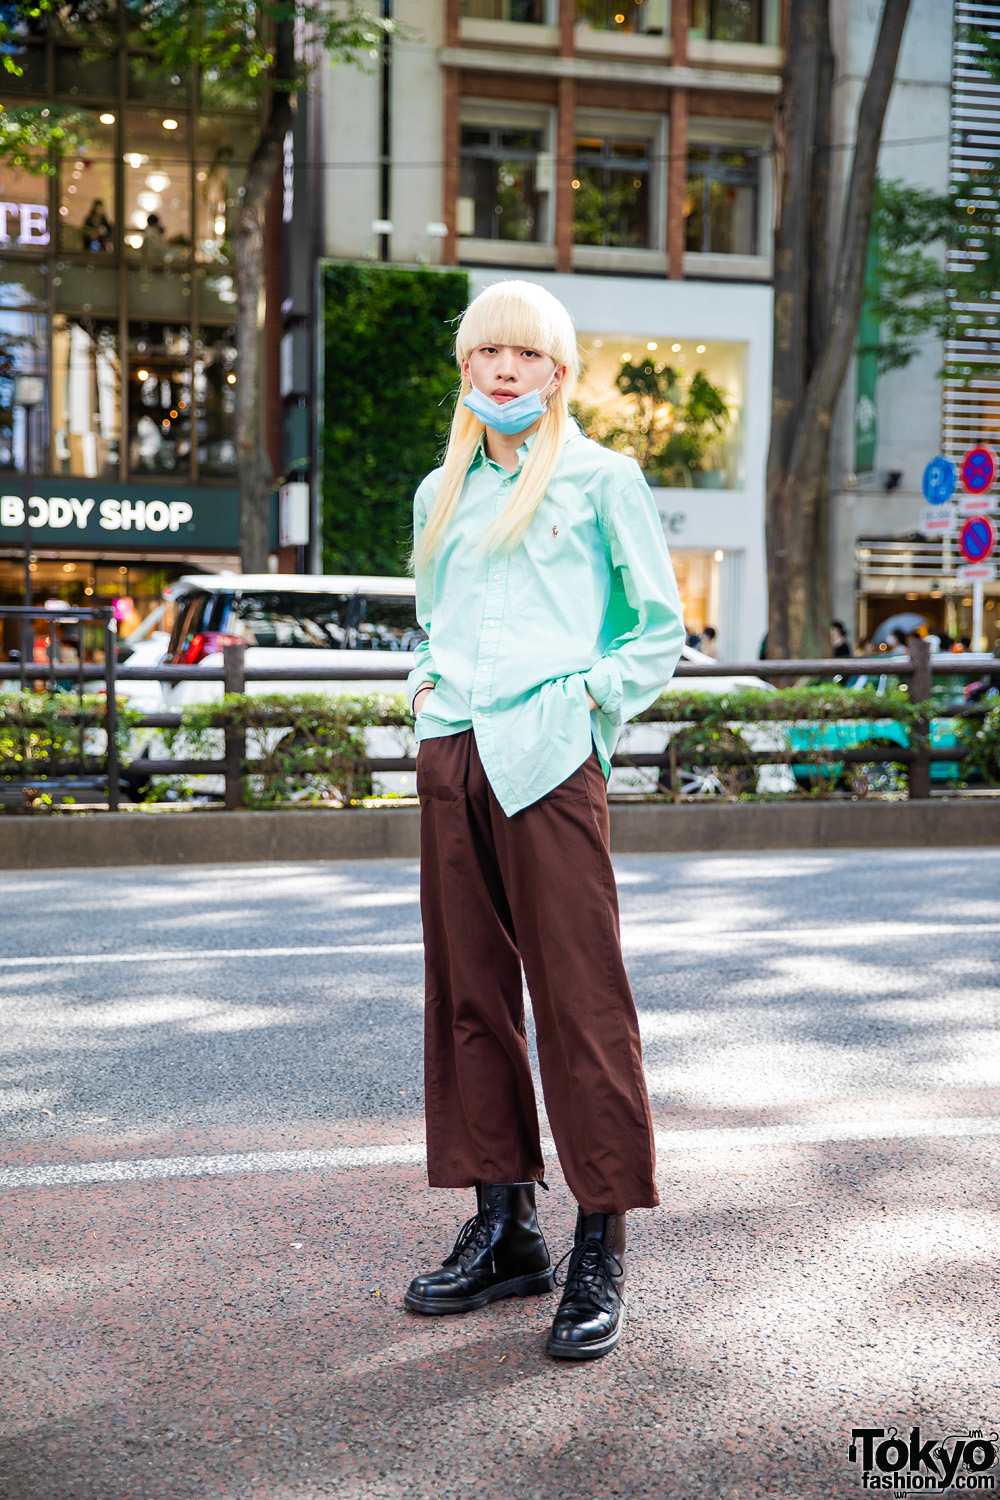 Japanese Mullet Hairstyle in Harajuku w/ Ralph Lauren Shirt, Vintage Pants, Dr. Martens Lace-Up Boots & Silver Jewelry